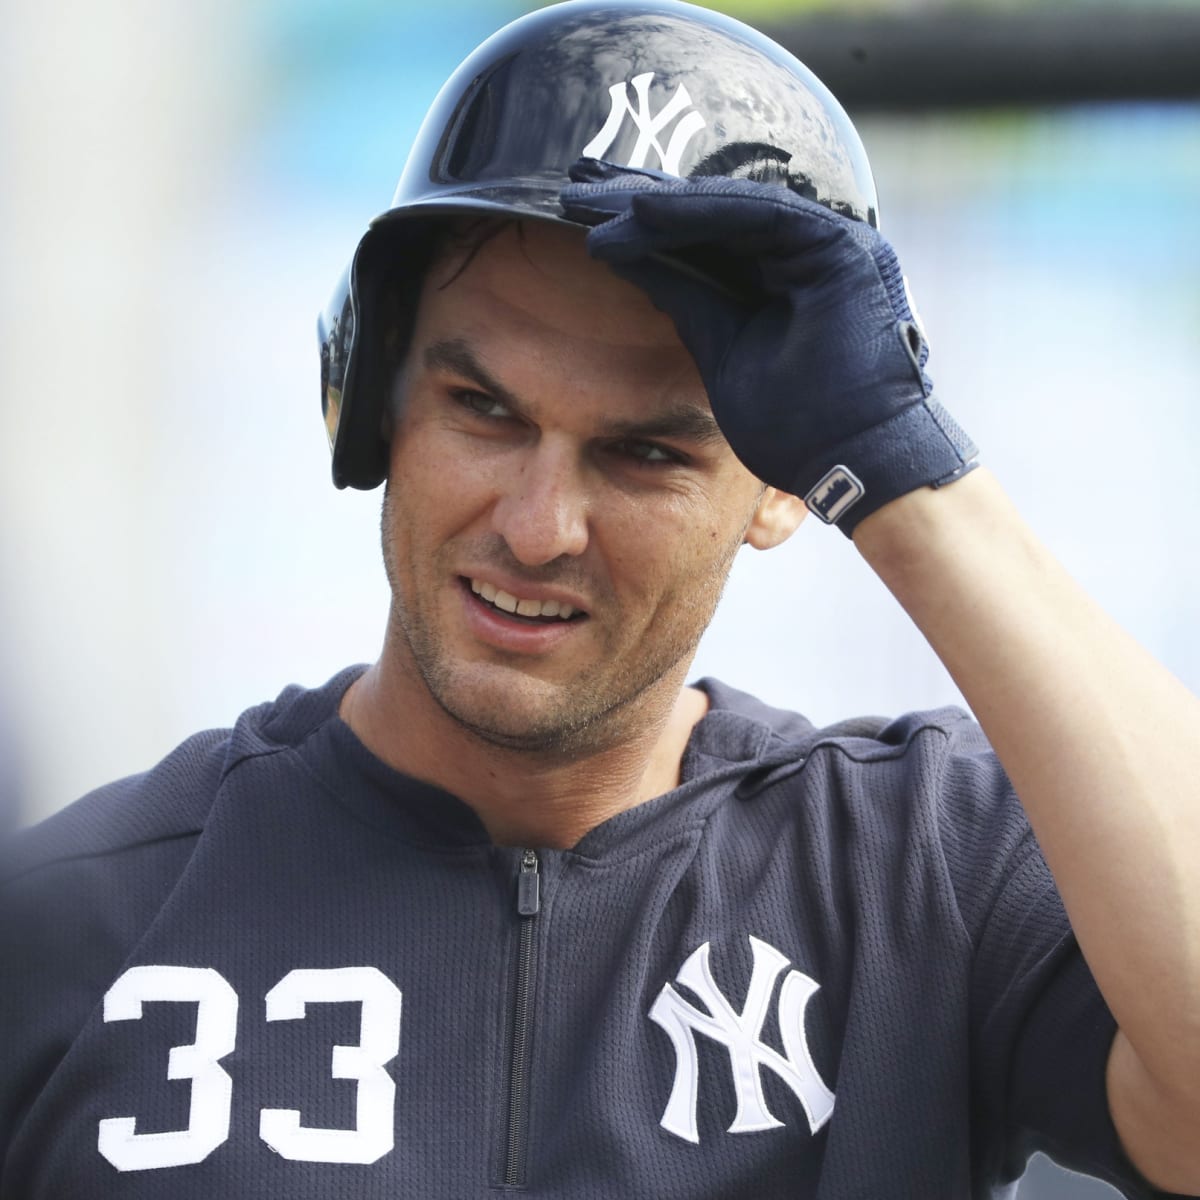 Greg Bird sparks rally as New York Yankees salvage Royals doubleheader